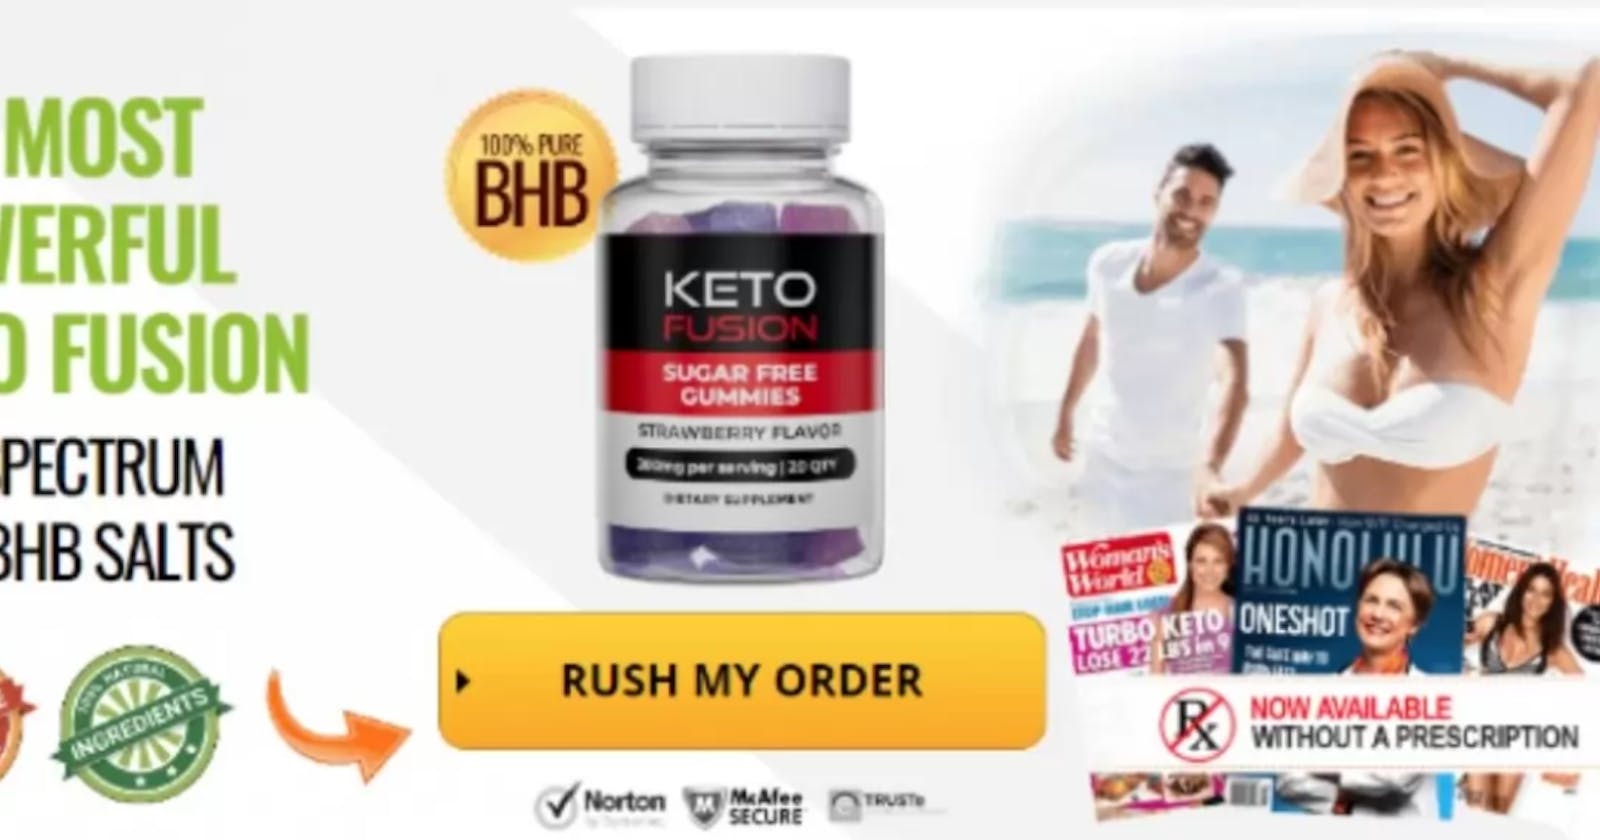 Keto Fusion Sugar Free Gummies Reviews (2023 Warning) Bad Customer Complaints to Worry About?